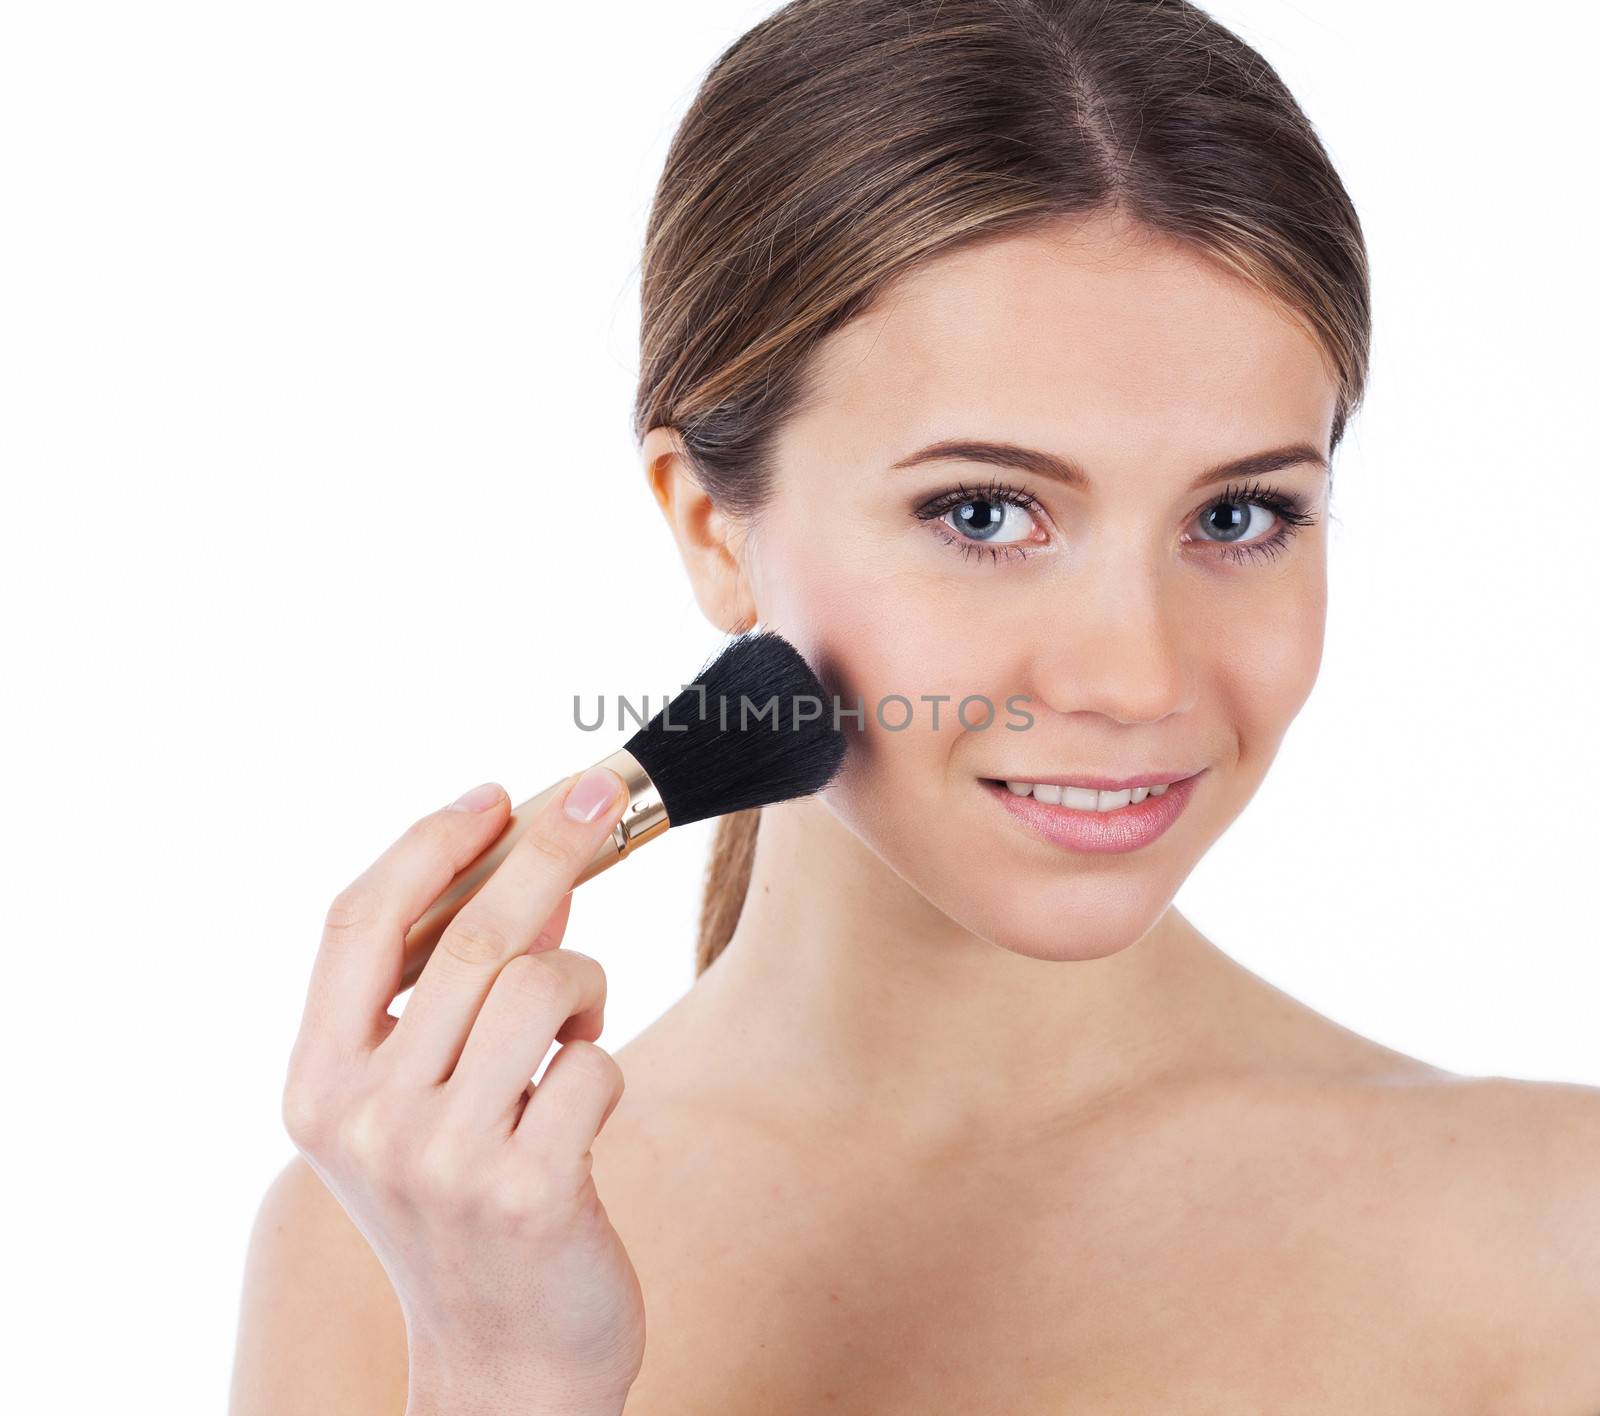 Close up portrait of a beautiful woman applying makeup, isolated on white